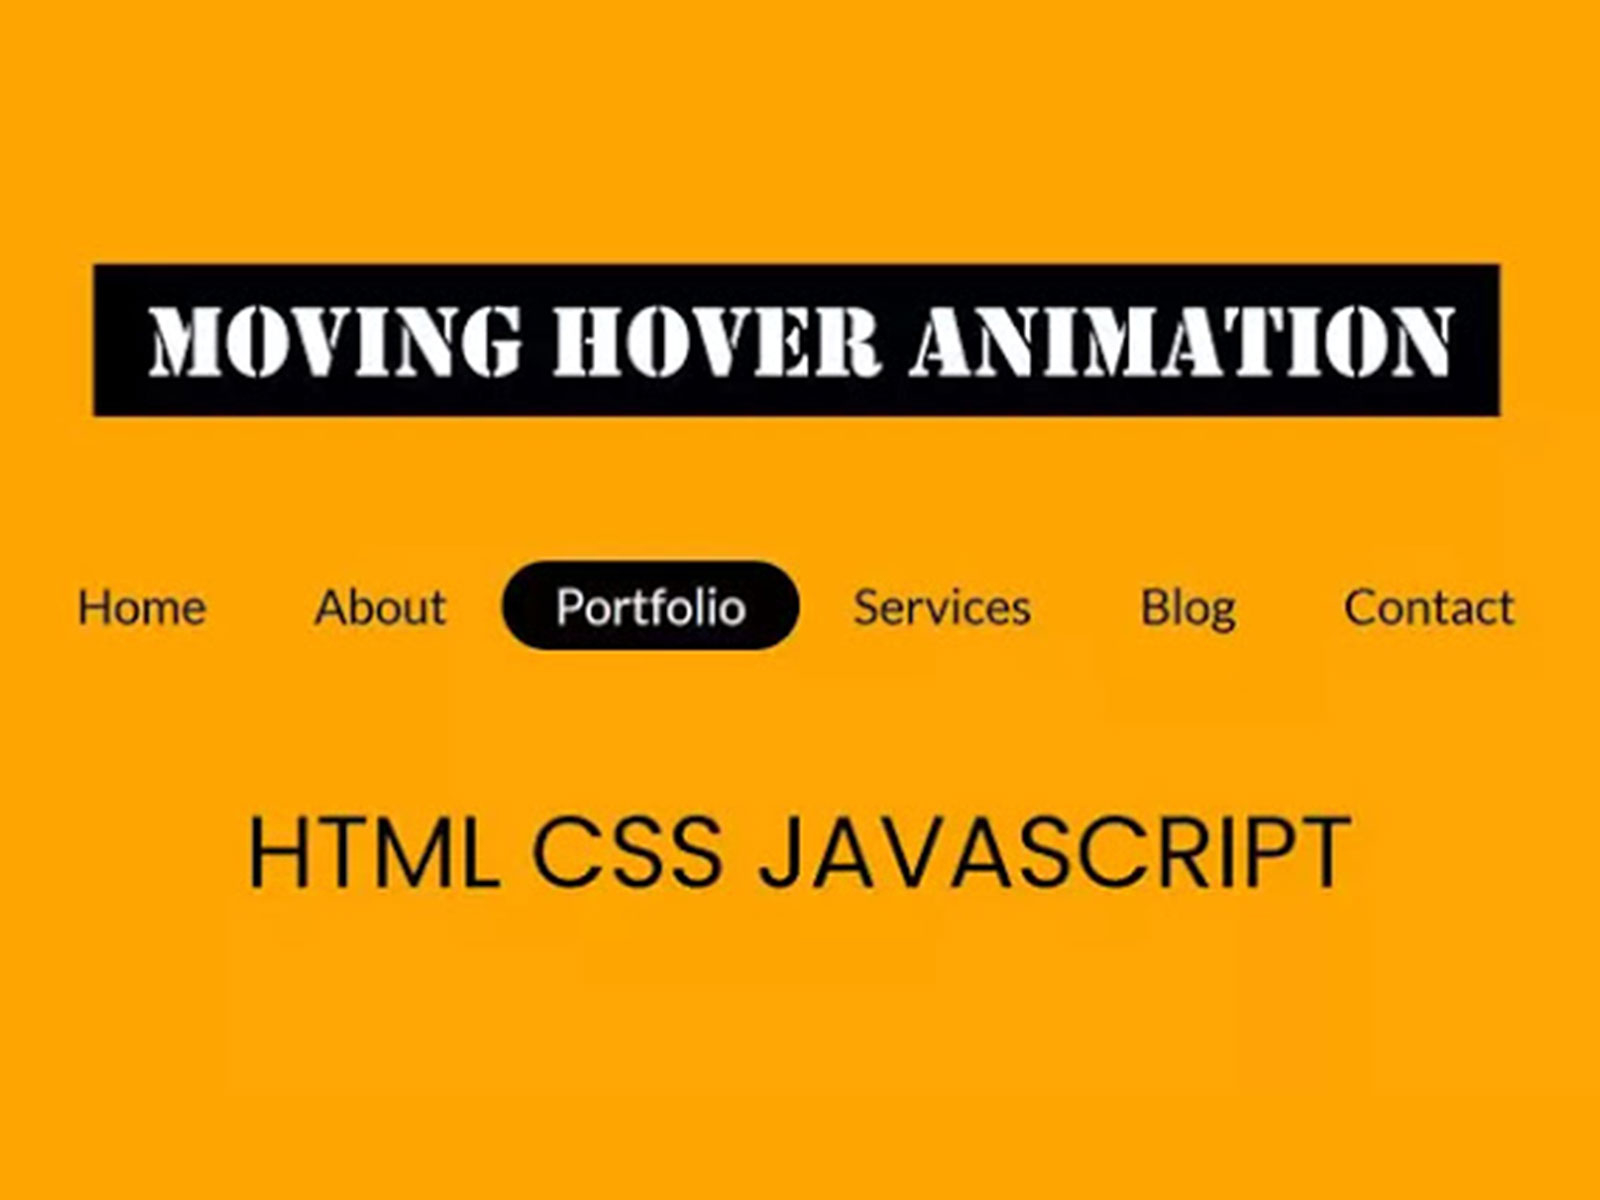 Menu CSS Animation with moving hover effect by codingflicks on Dribbble